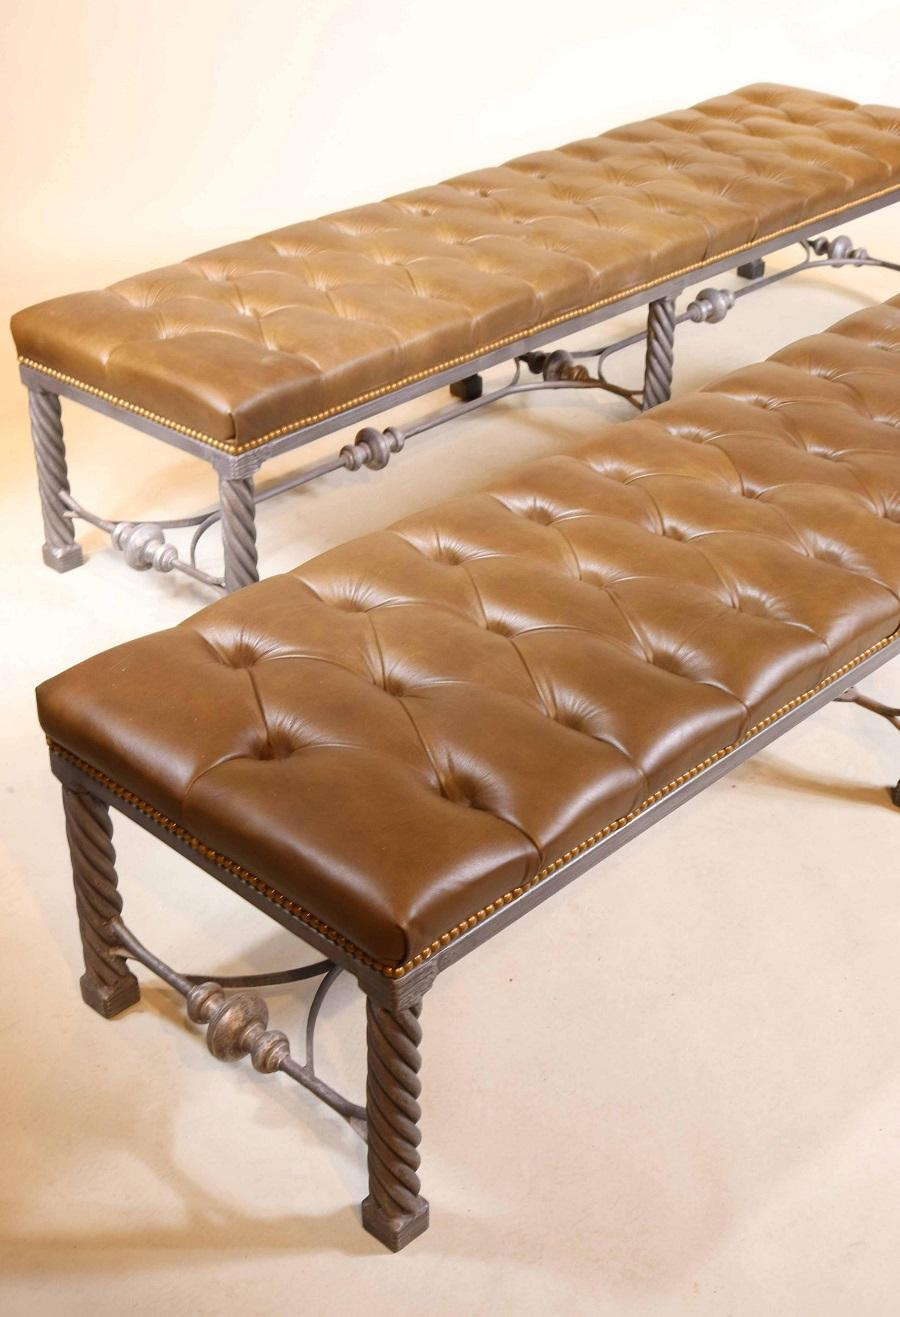 Pair of long modern Tufted leather benches. The frames of the benches are white metal.